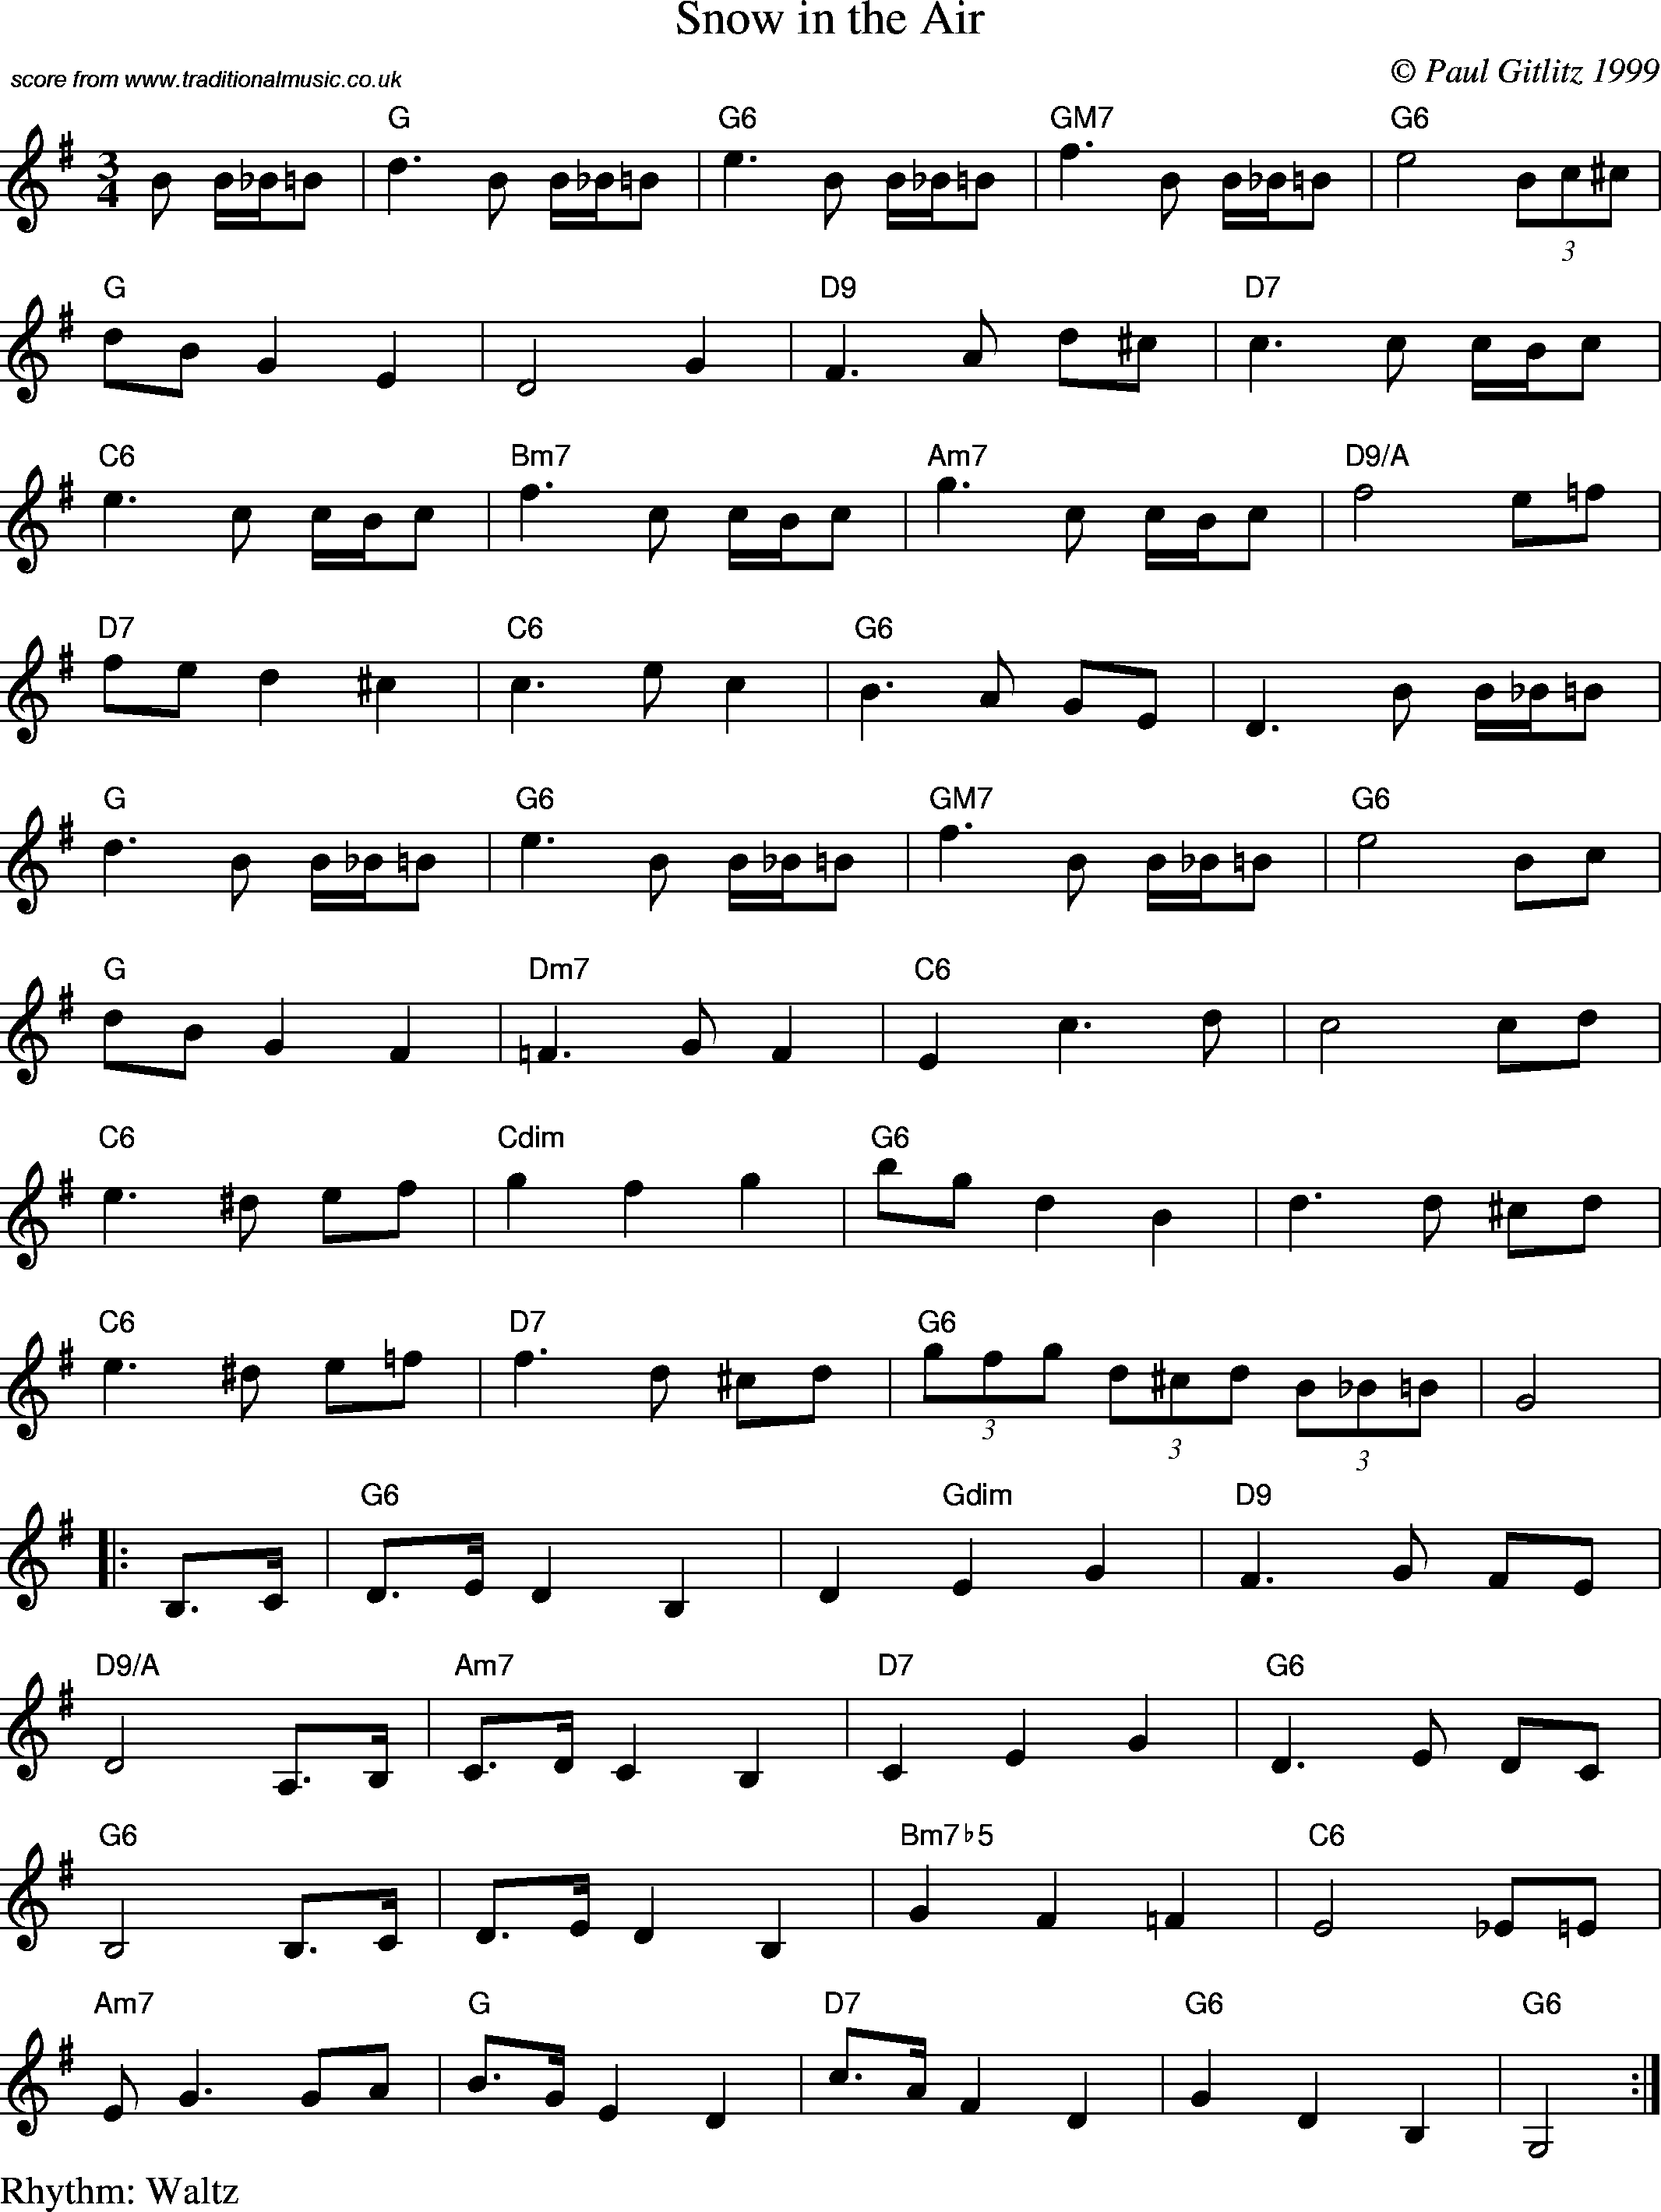 Sheet Music Score for Waltz - Snow in the Air